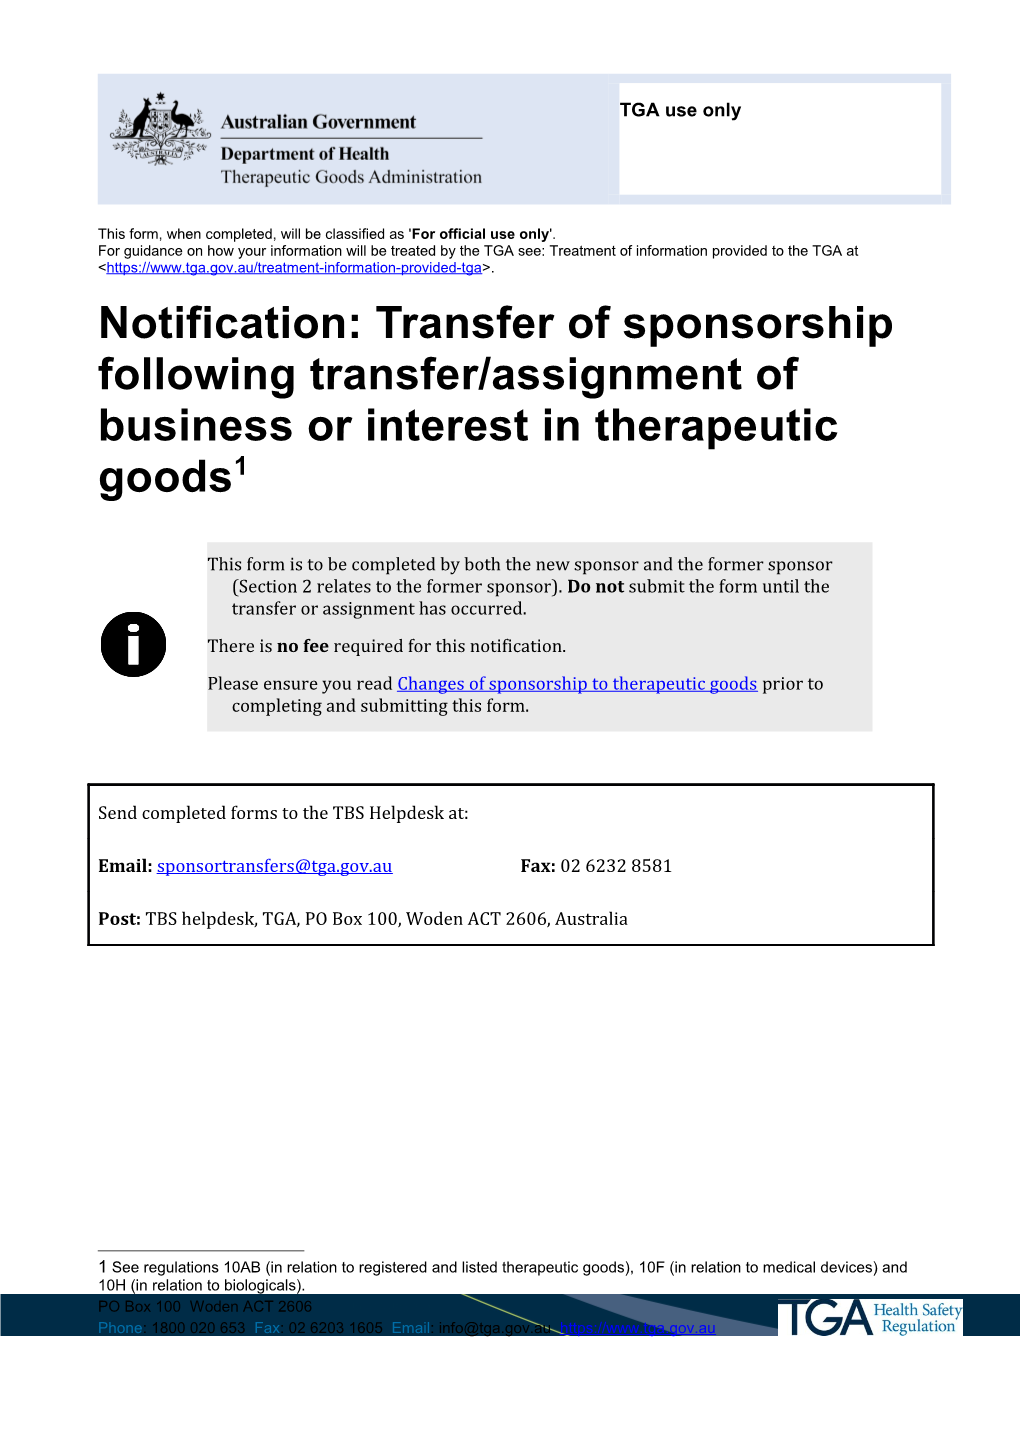 Notification: Transfer of Sponsorship Following Transfer/Assignment of Business Or Interest